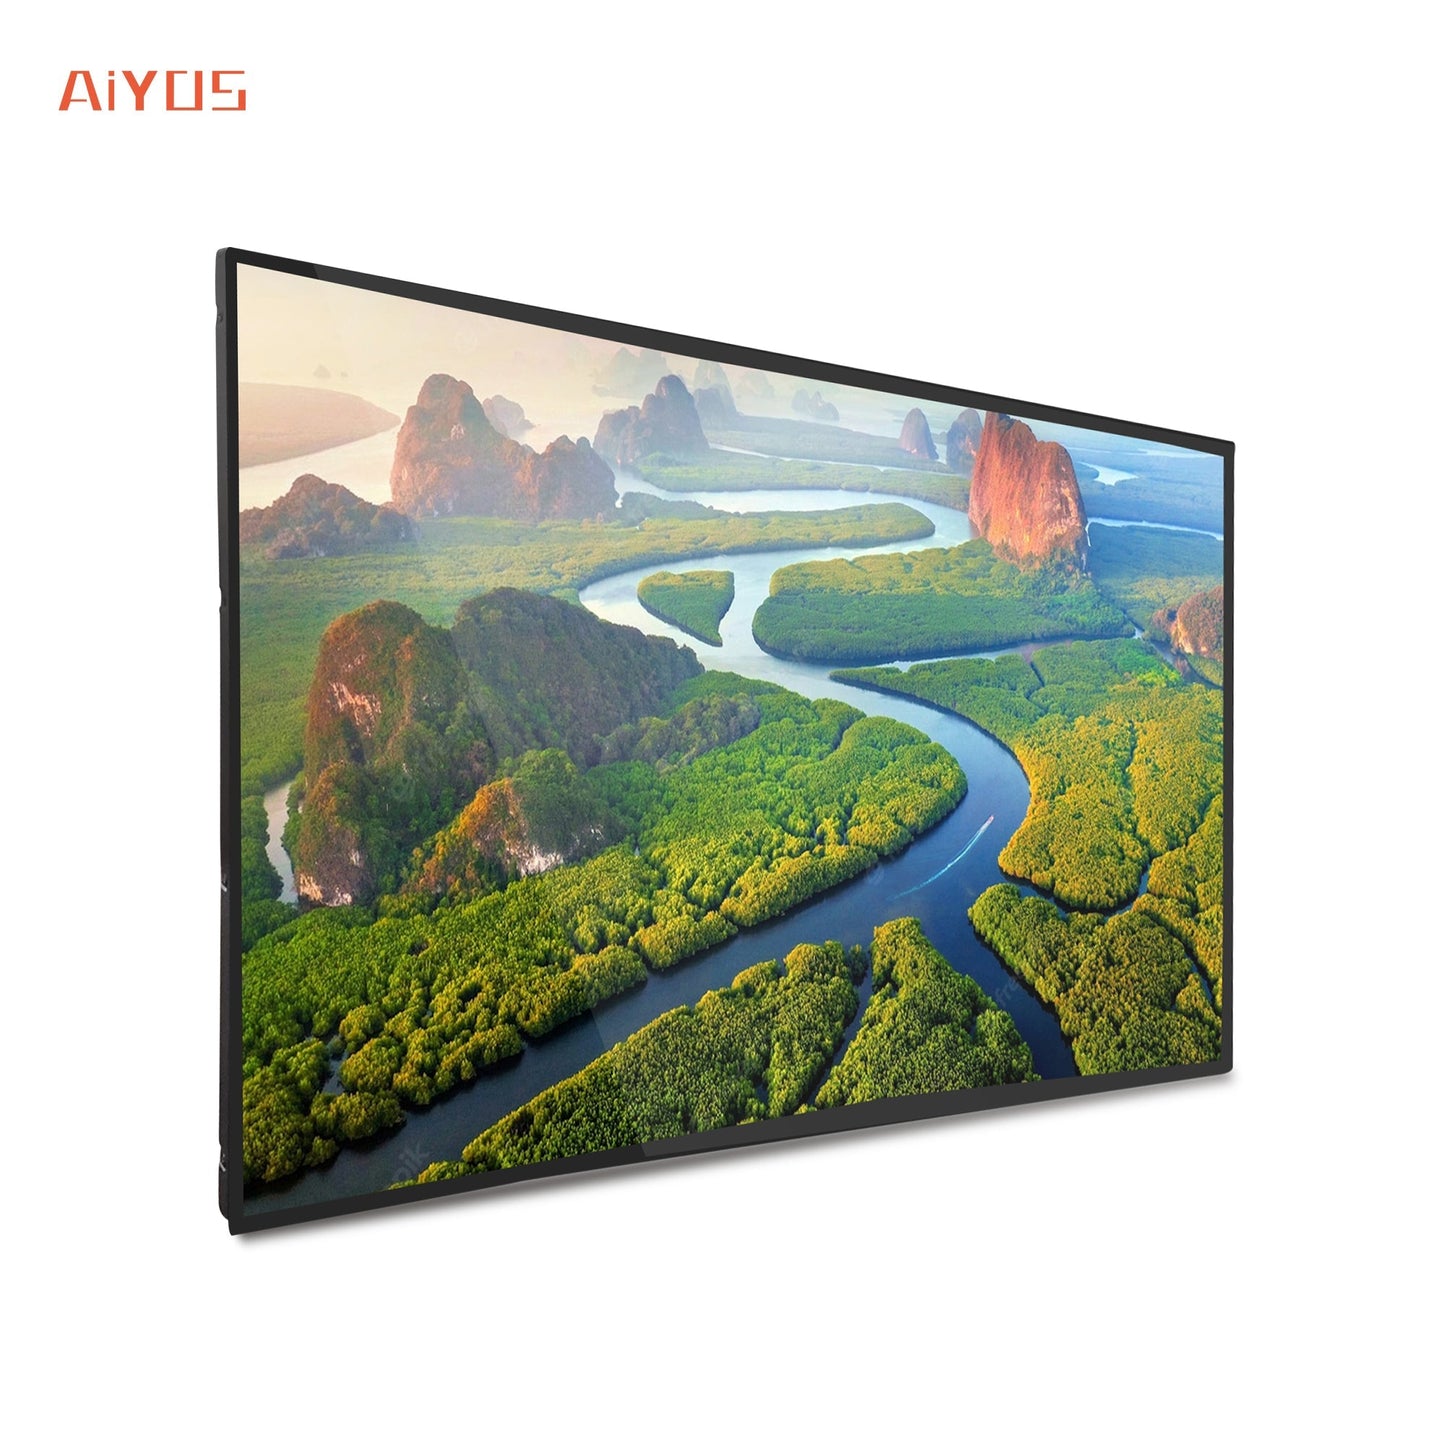 65 Inch Ultra Thin Touch Screen Wall Mount Digital Signage Smart Advertising Display LCD Advertising Screen